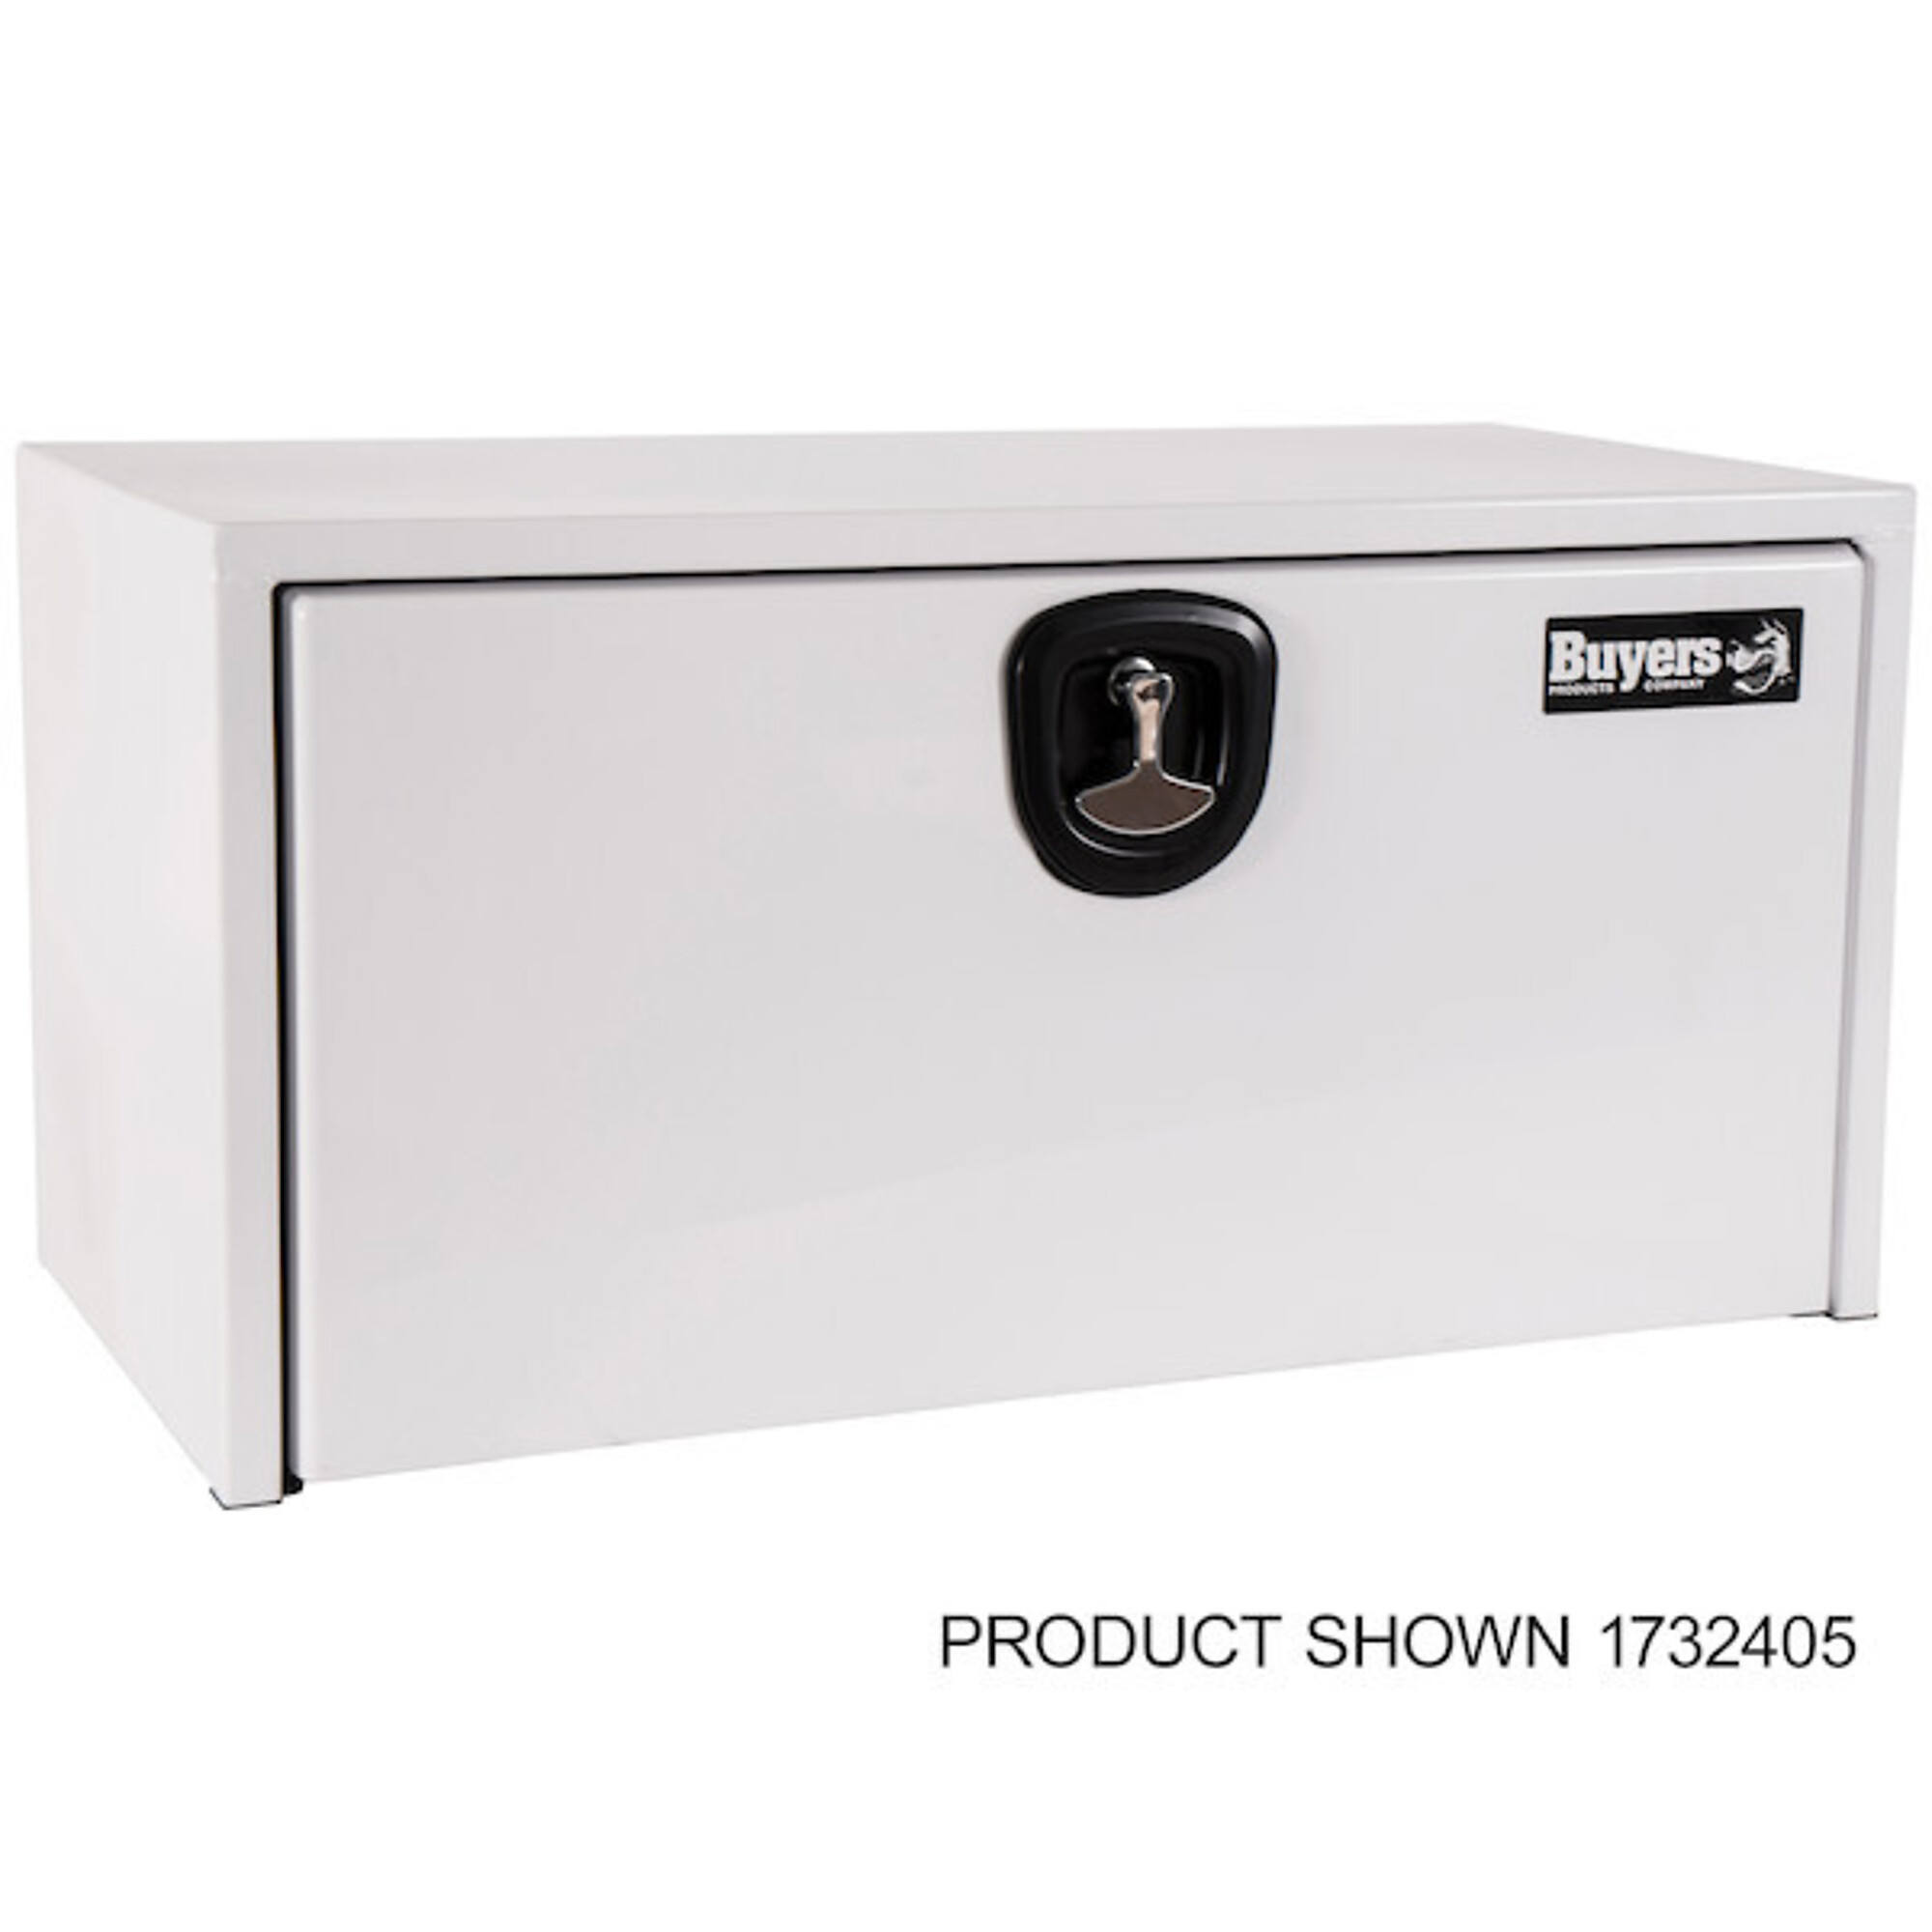 Buyers Products, Underbody Truck Box, Width 36 in, Material Carbon Steel, Color Finish Glossy White, Model 1732405